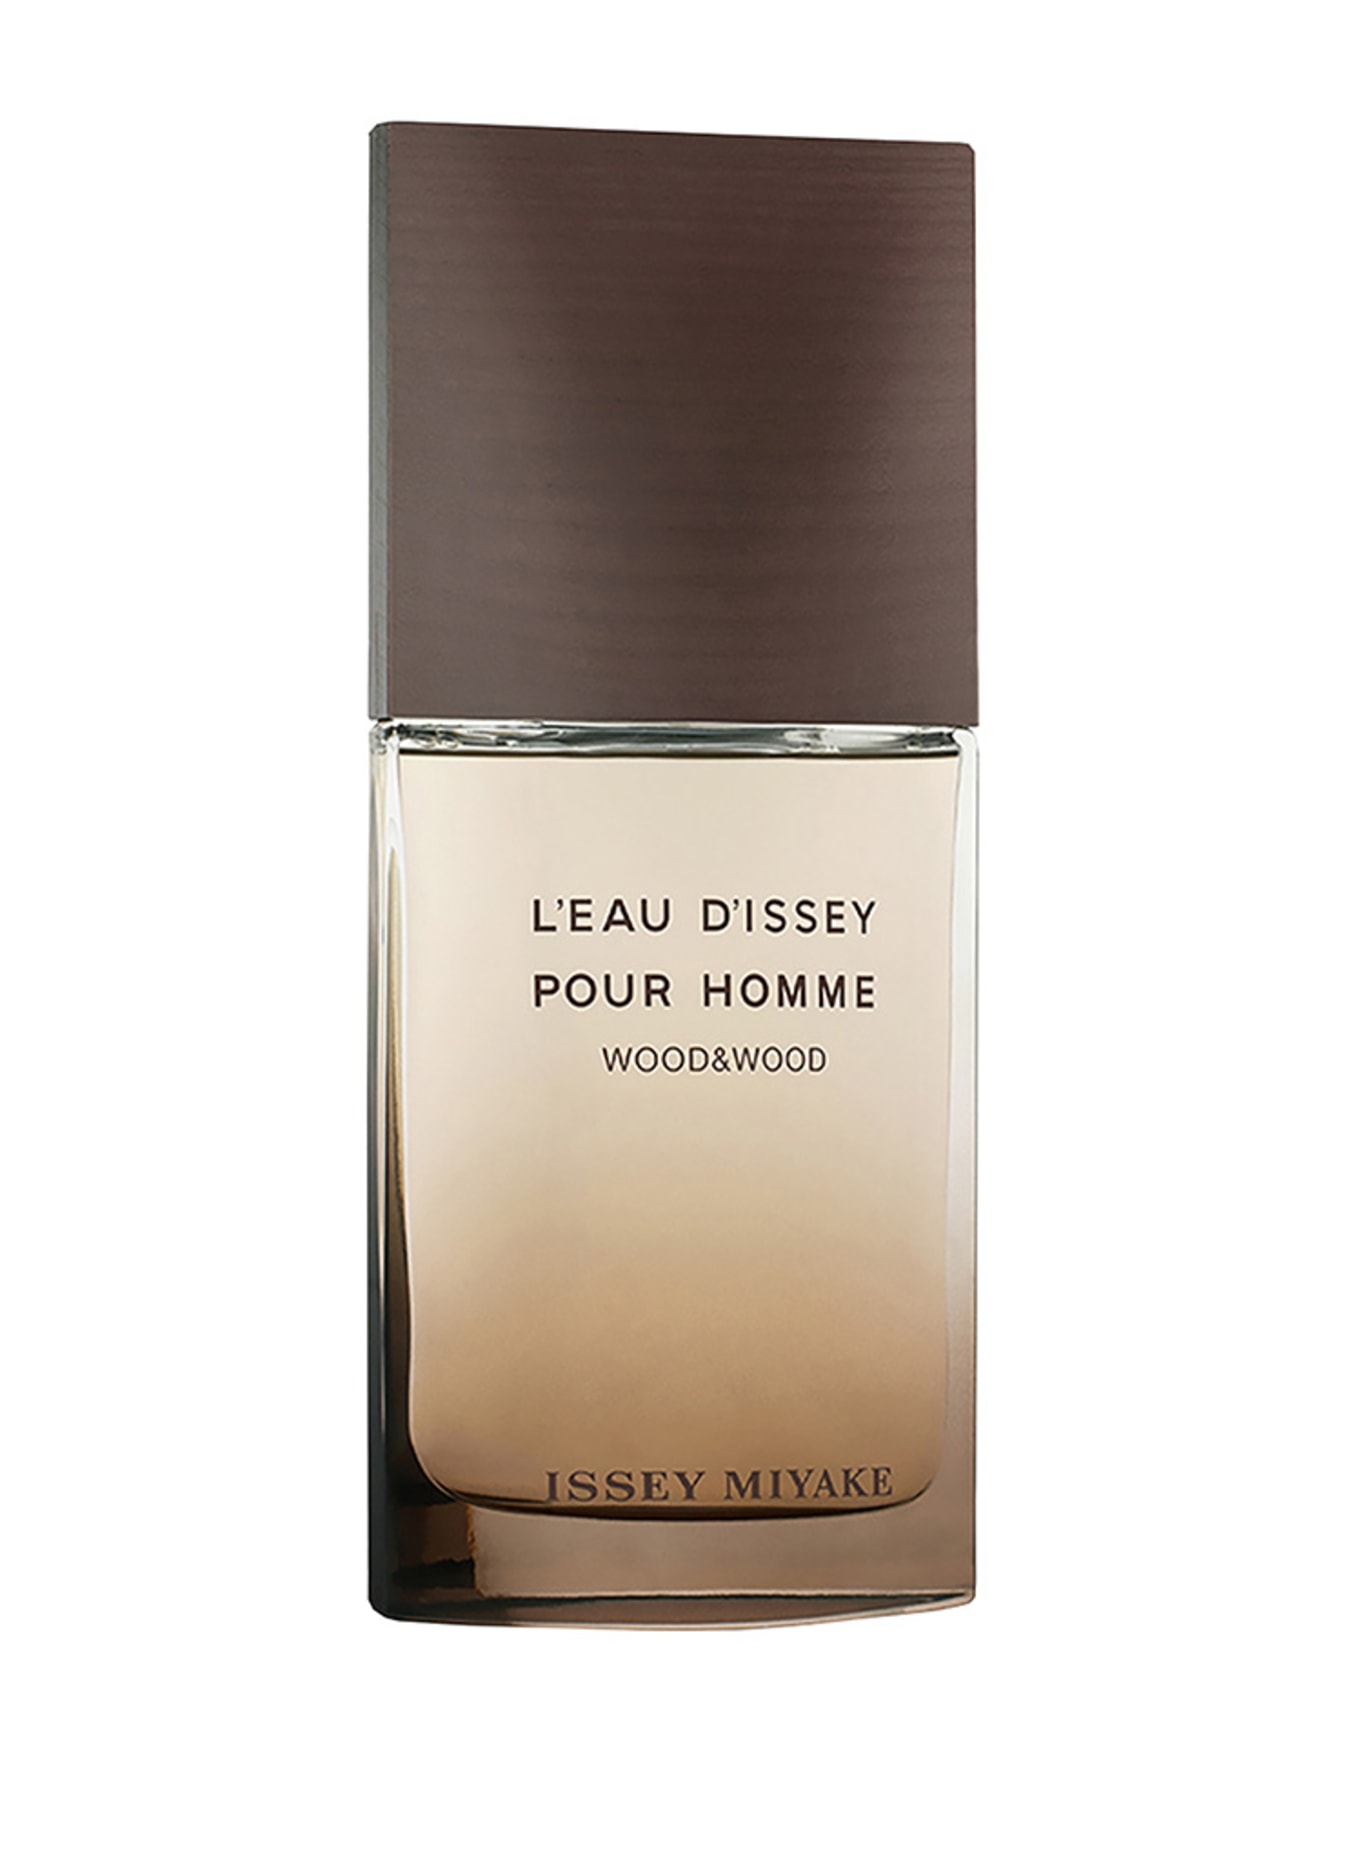 ISSEY MIYAKE L'EAU D'ISSEY POUR HOMME WOOD&WOOD (Obrazek 1)